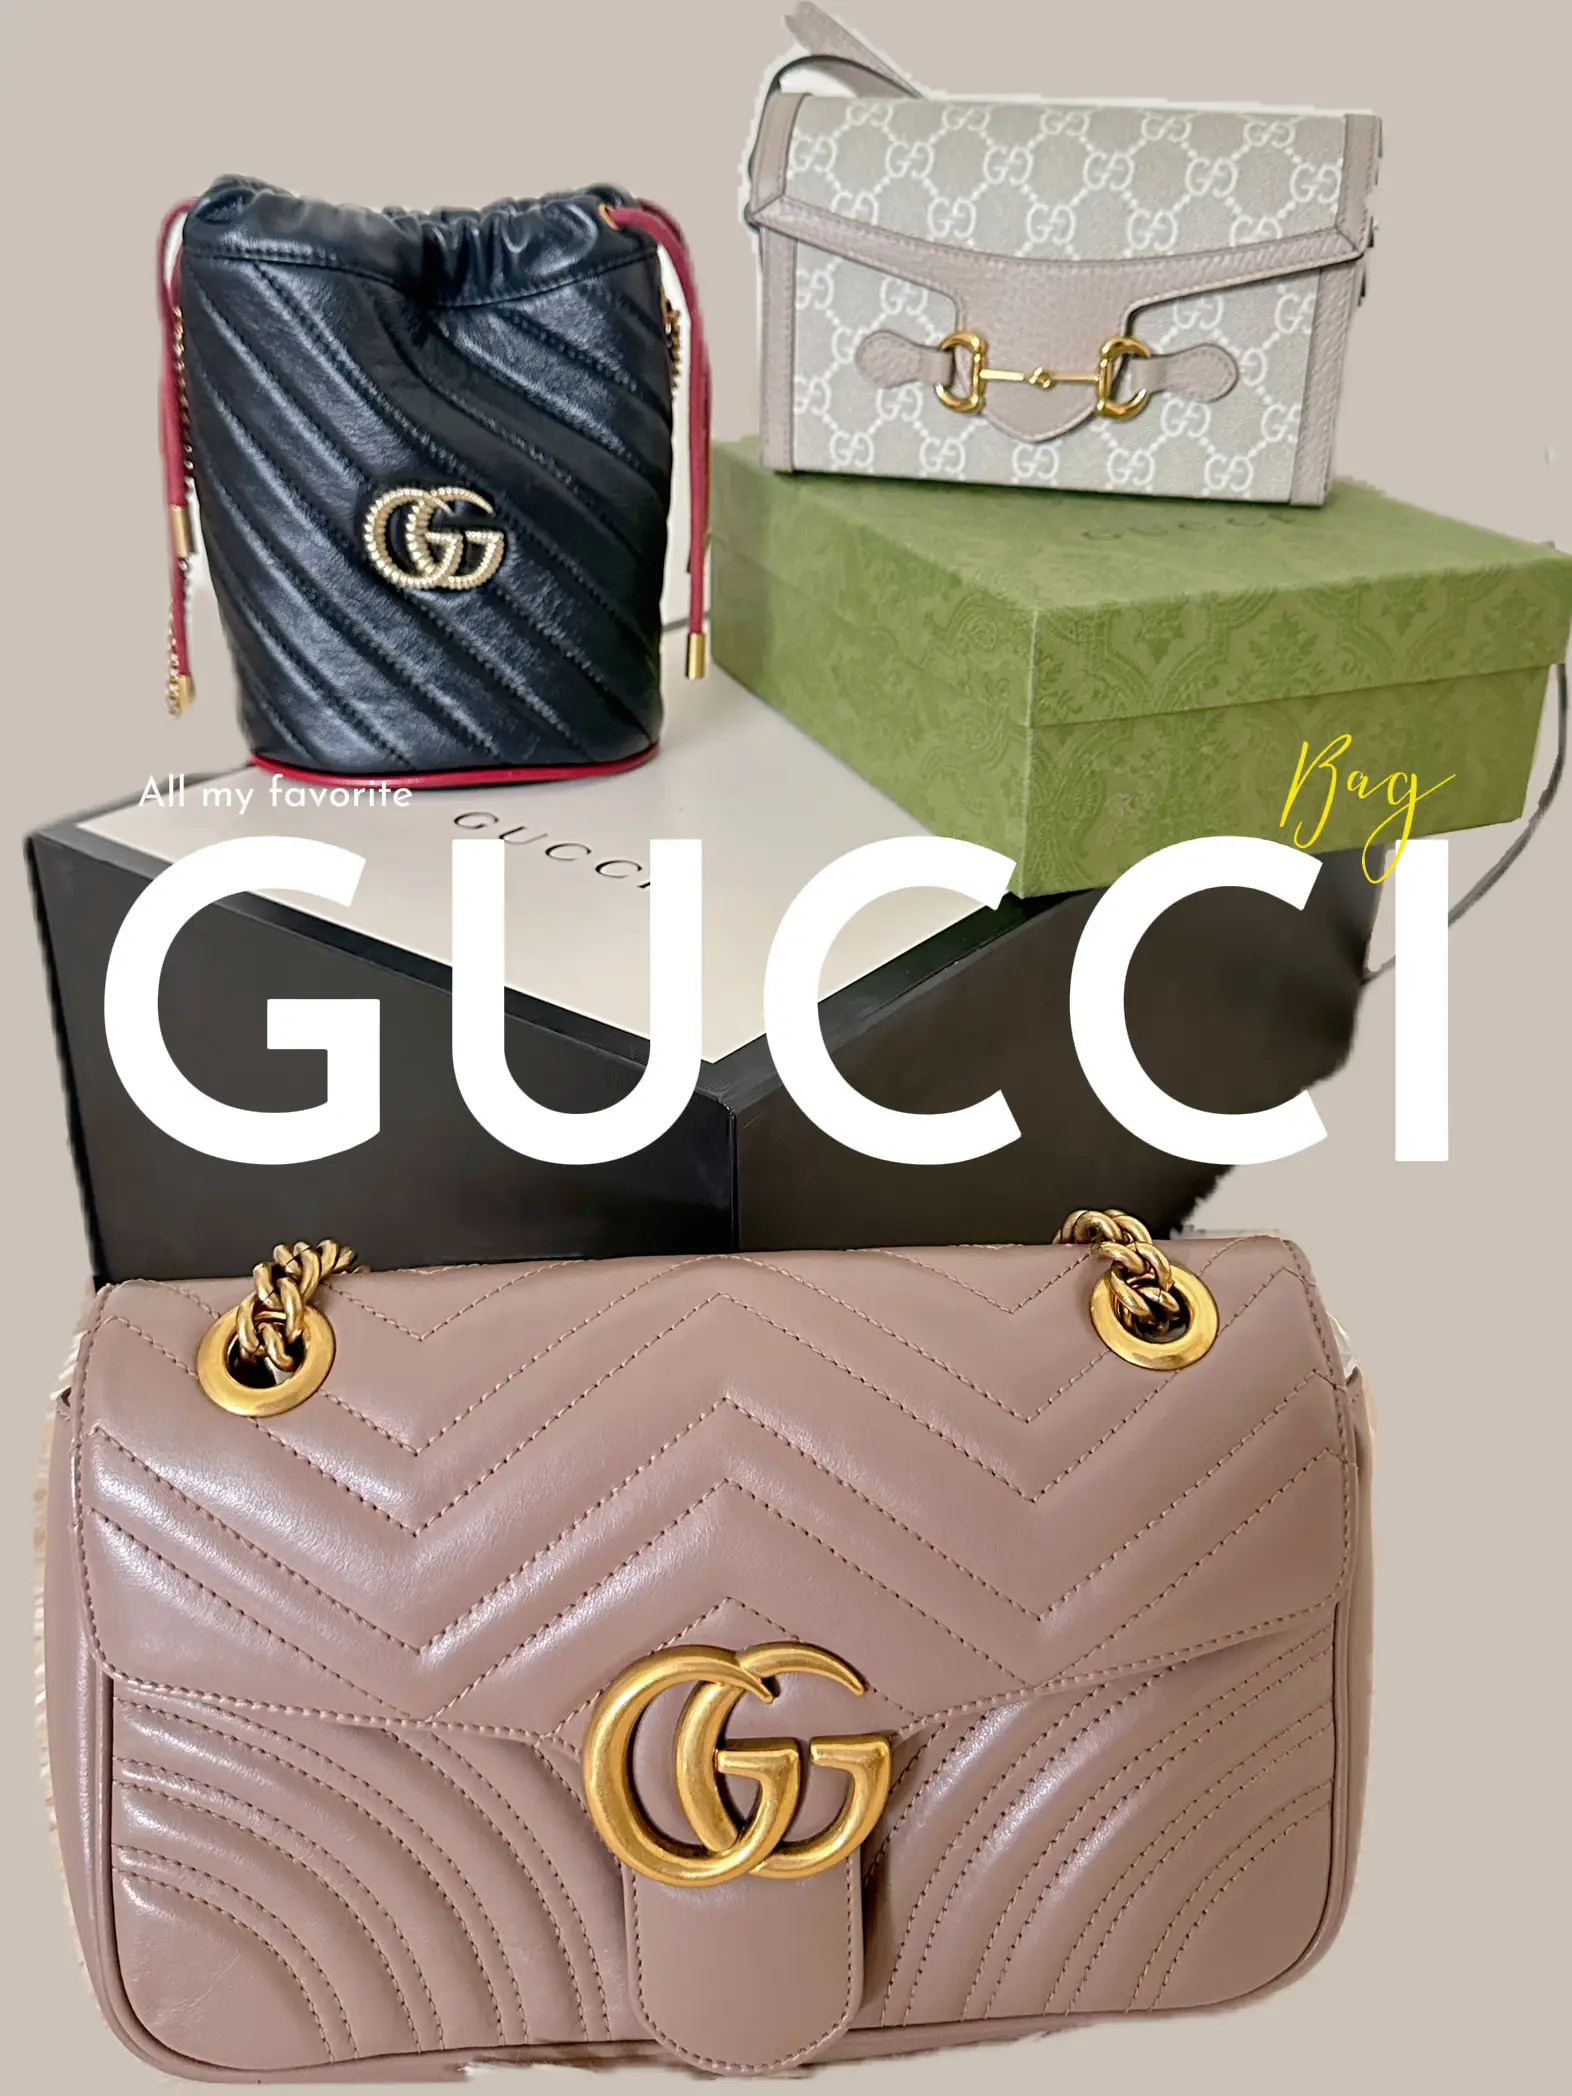 Nothing like a little #Gucci, Louis, or fur to make yah look!! Pup clo